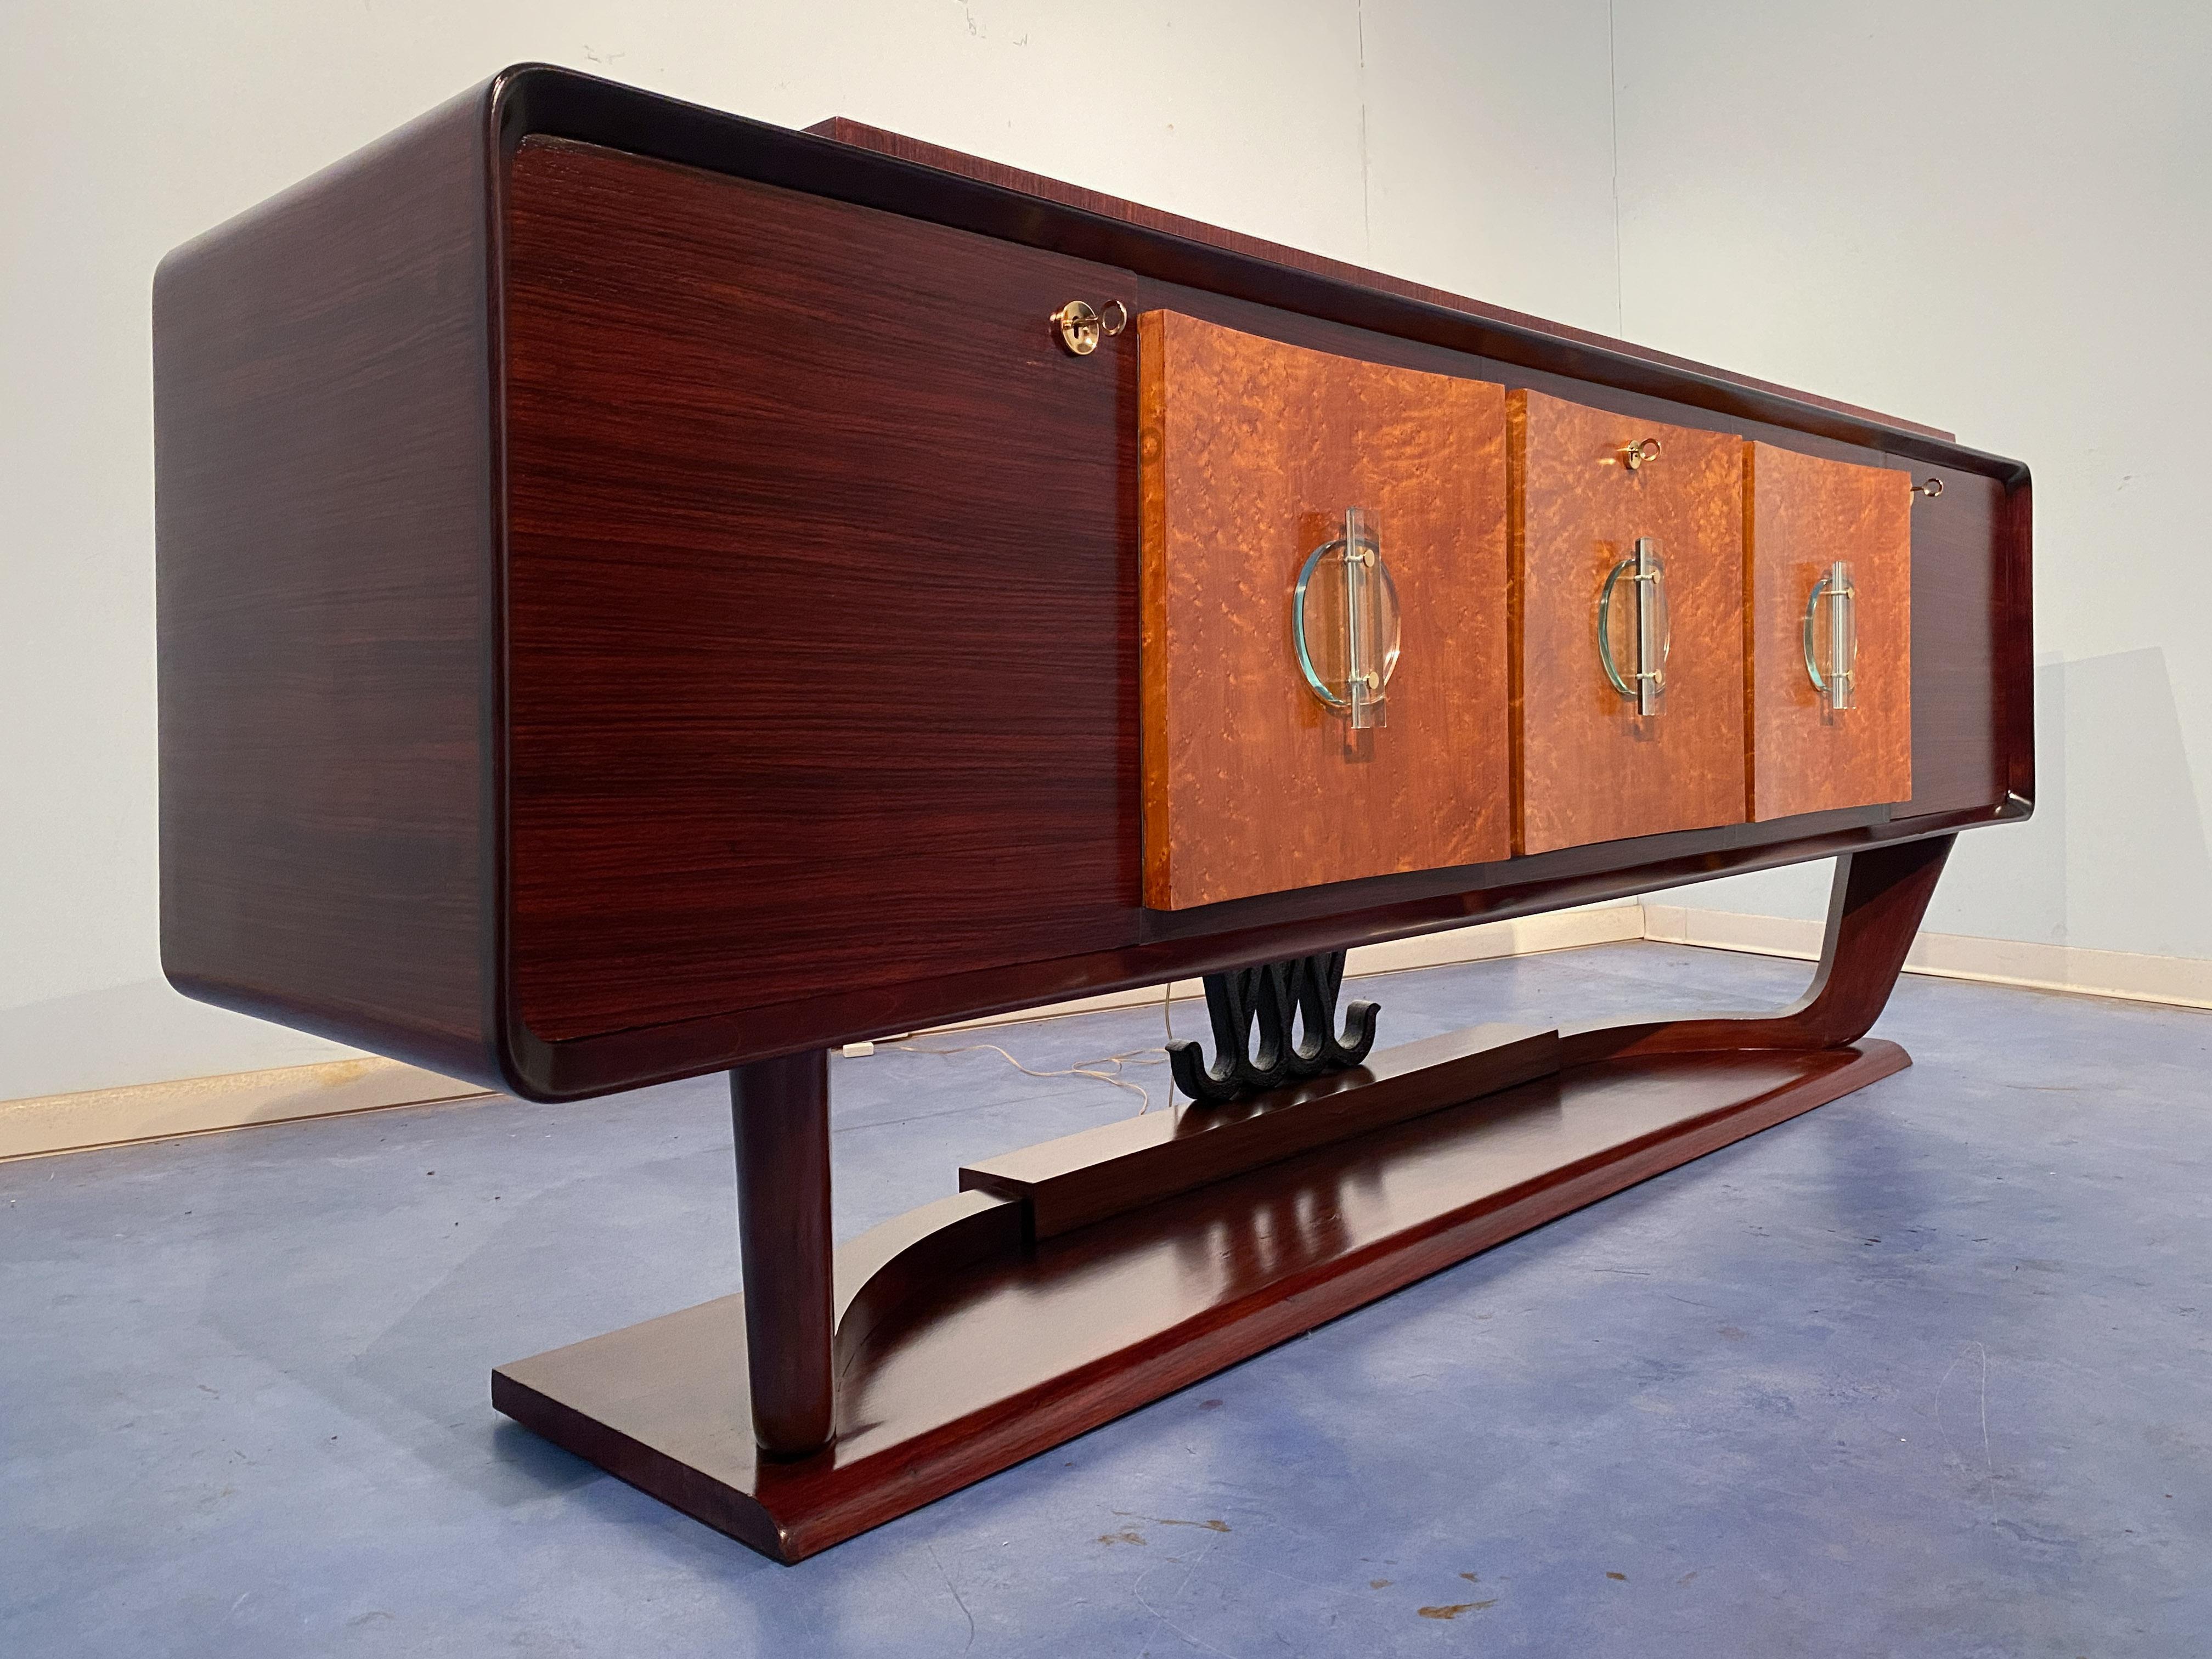 Mid-20th Century Italian Art Deco Sideboard with Bar Cabinet Attributed to Osvaldo Borsani, 1940s For Sale